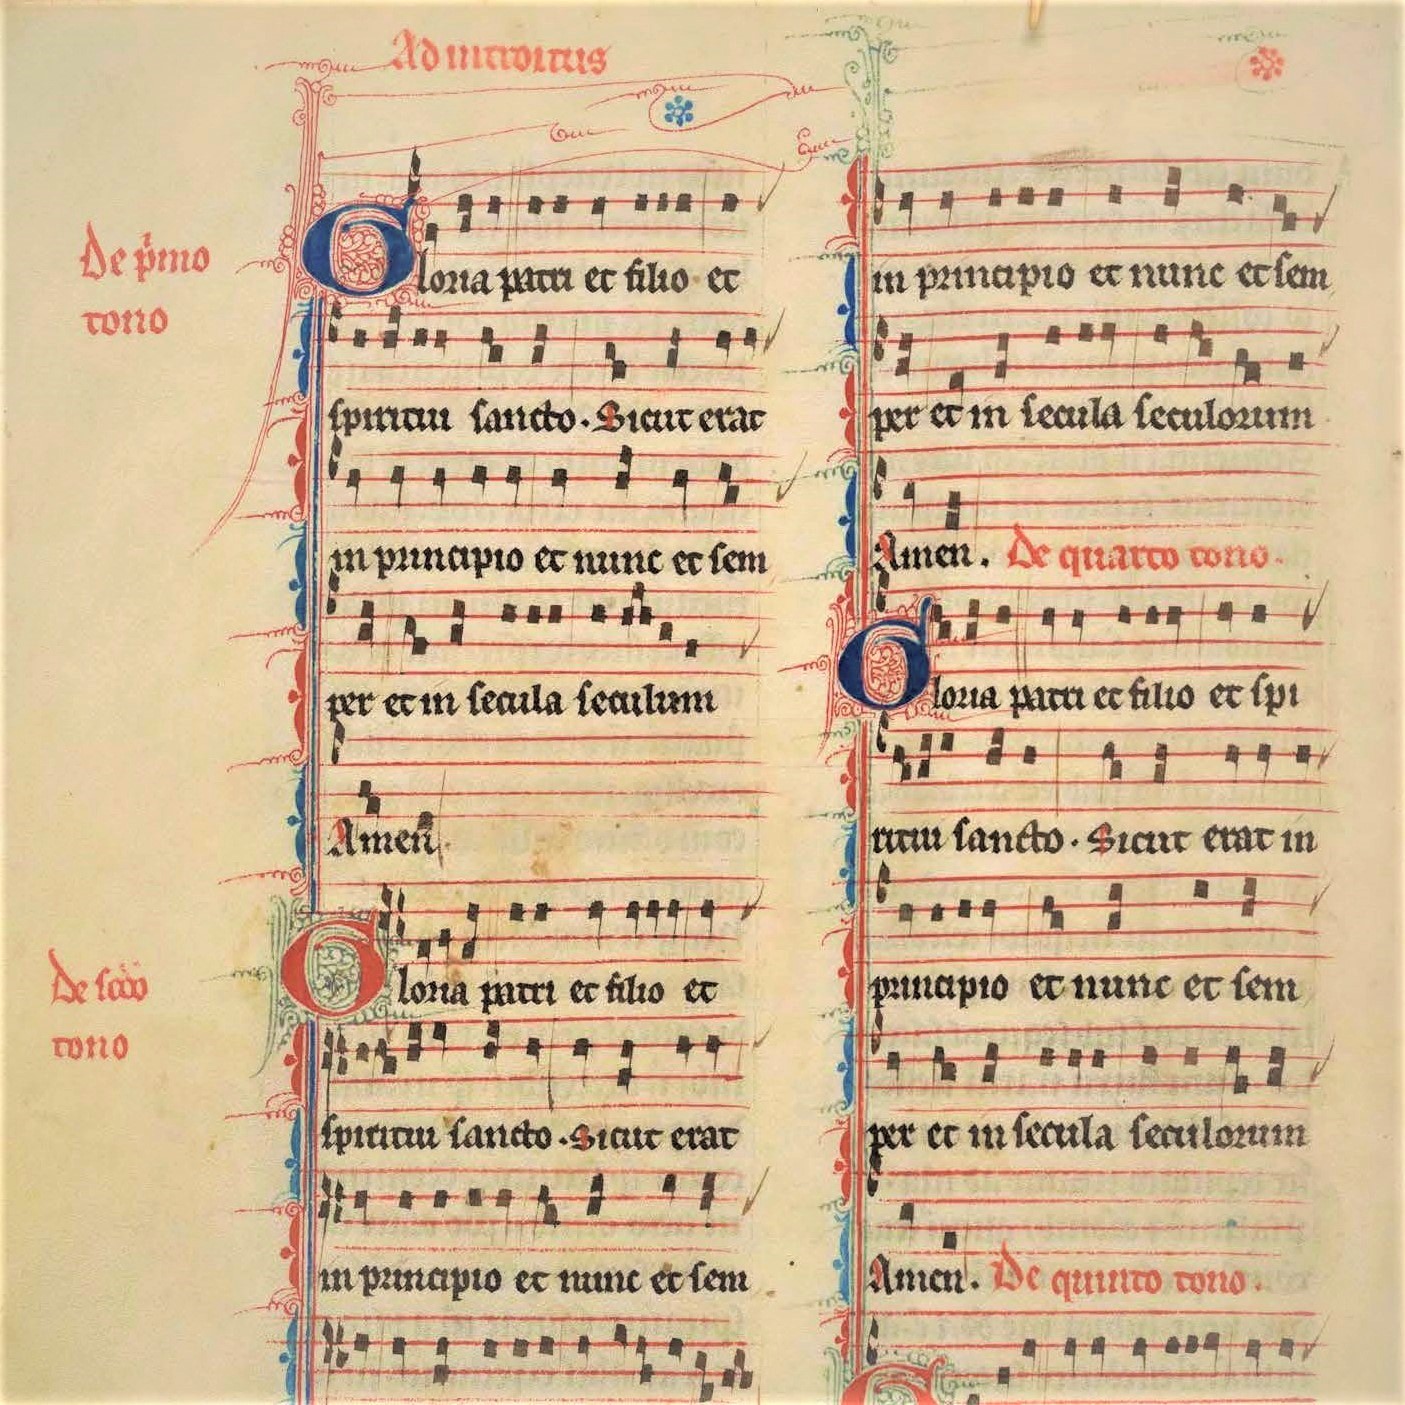 Dating from the second half of the 13th century, this Dominican gradual contains music for the Mass and some offices.